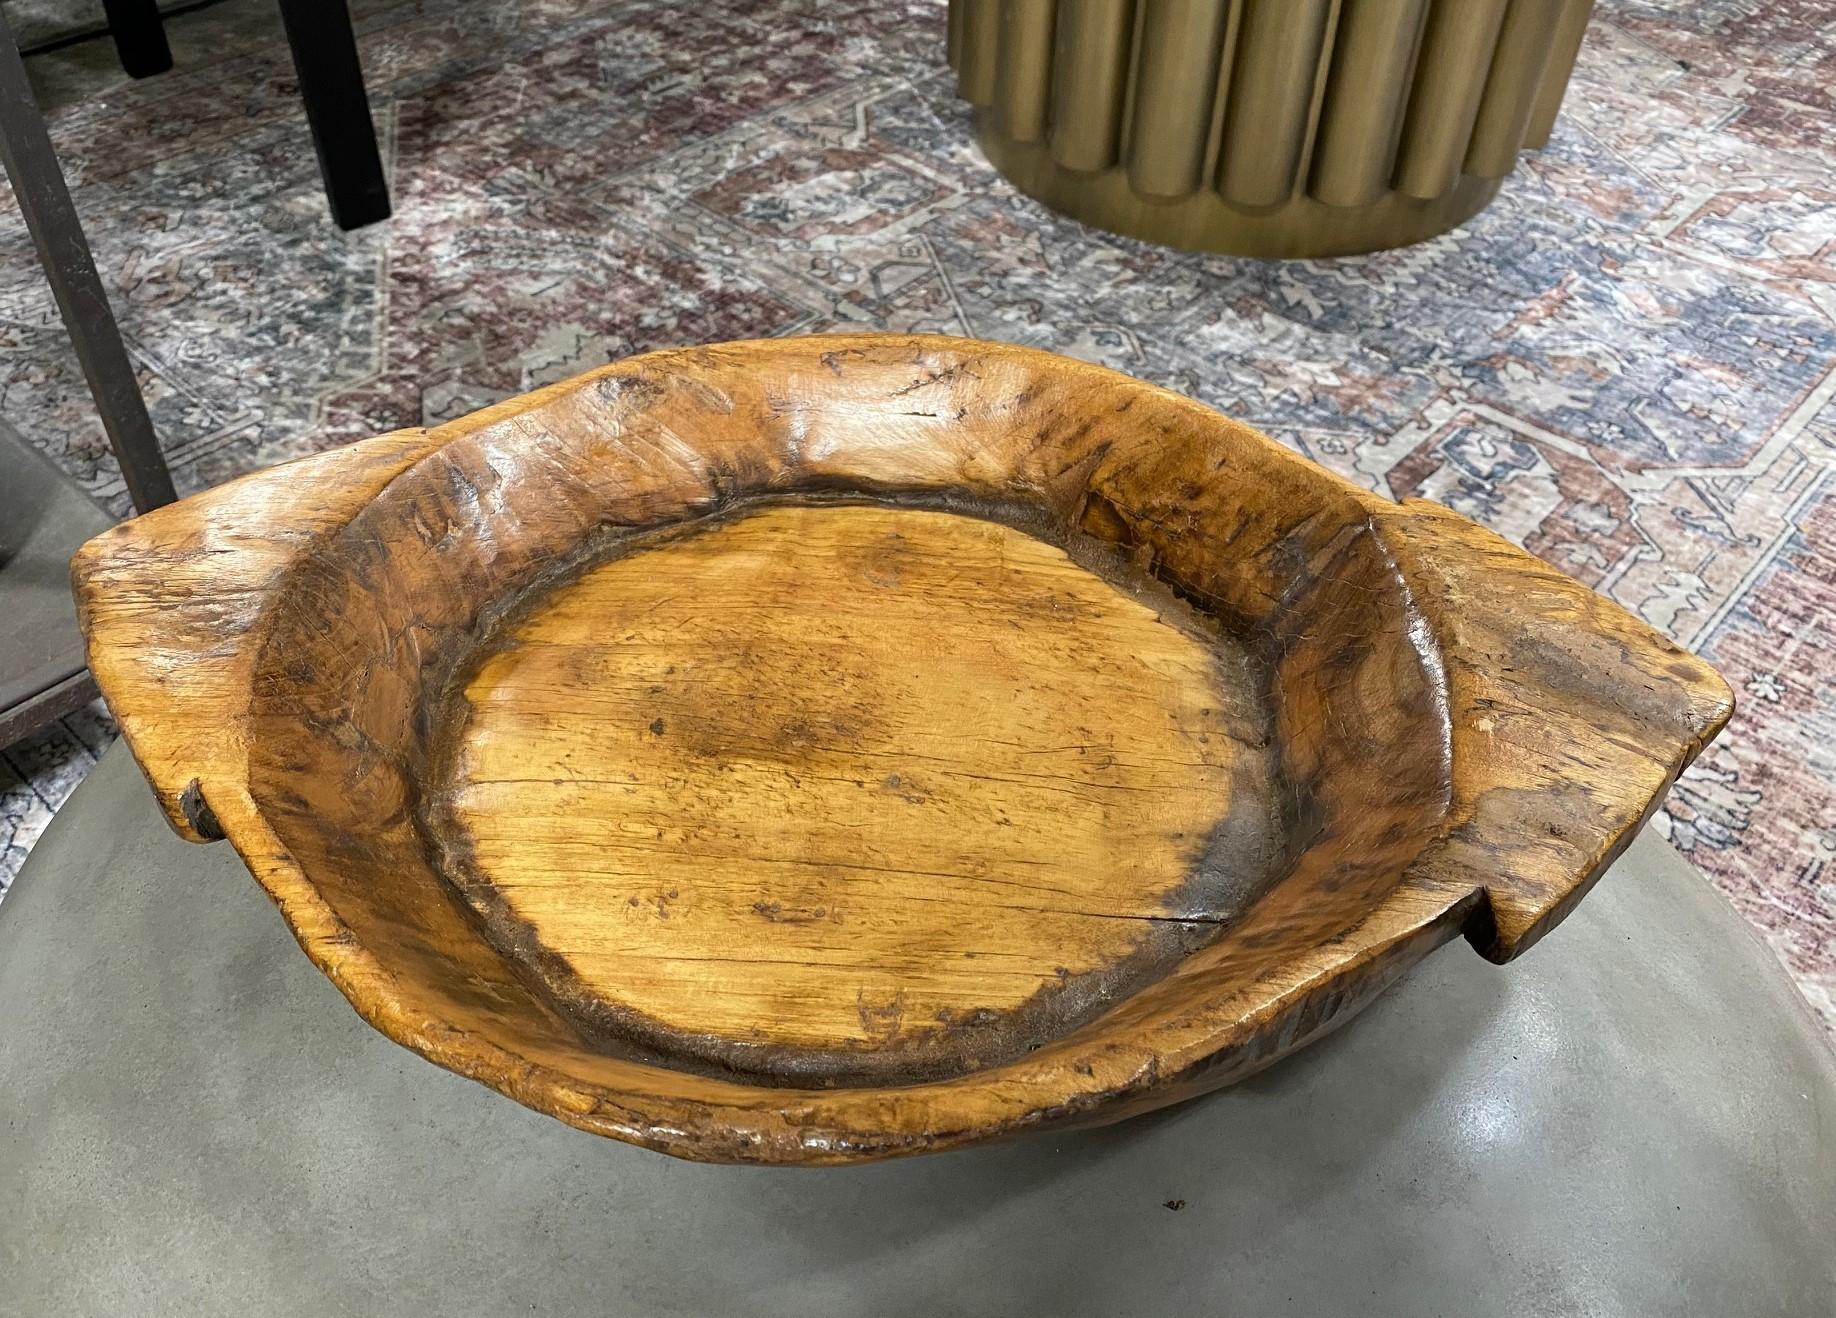 A wonderful large Folk Art carved bowl with beautiful natural wood grain and glowing colorful patina acquired with age. This piece has a very organic, Wabi-Sabi feel to it. The pointed handles are an unusual, unique touch. 

From a collection of